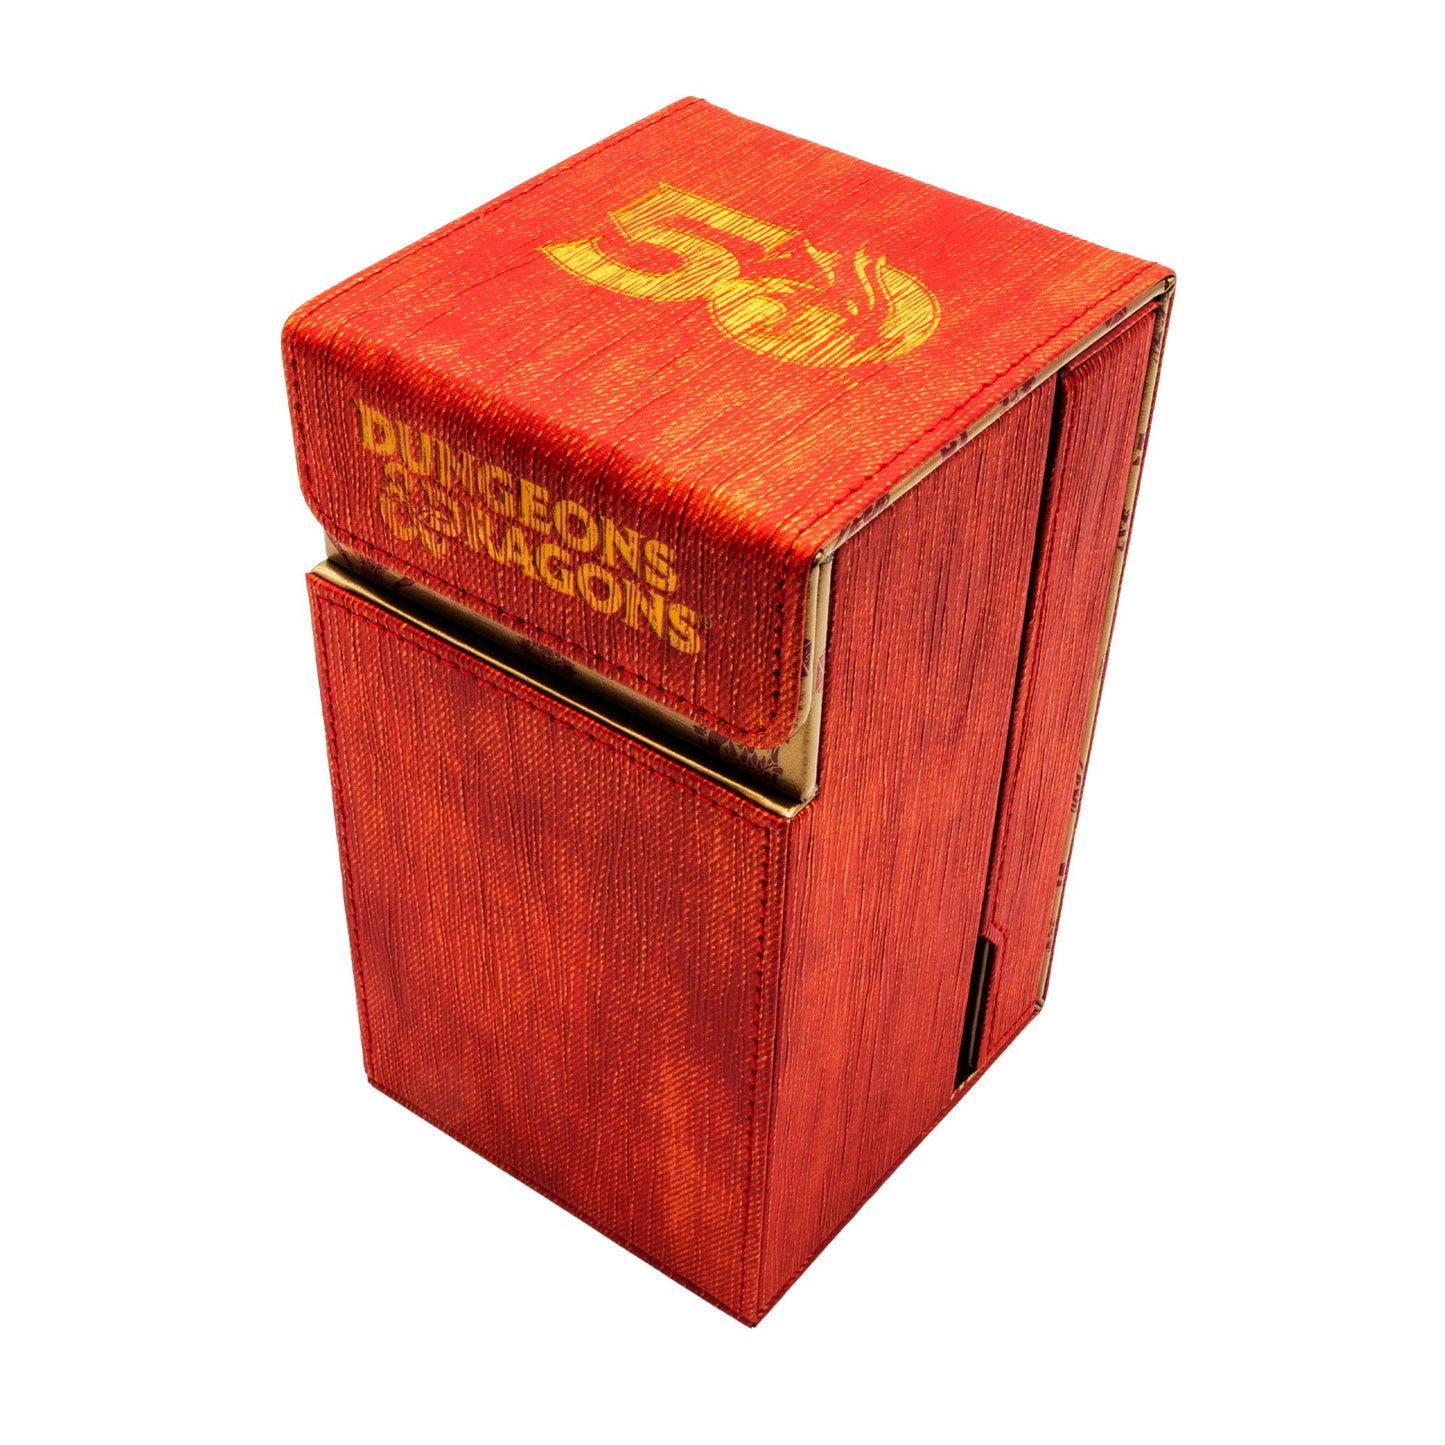 Dungeons & Dragons 50th Anniversary Dice Tower